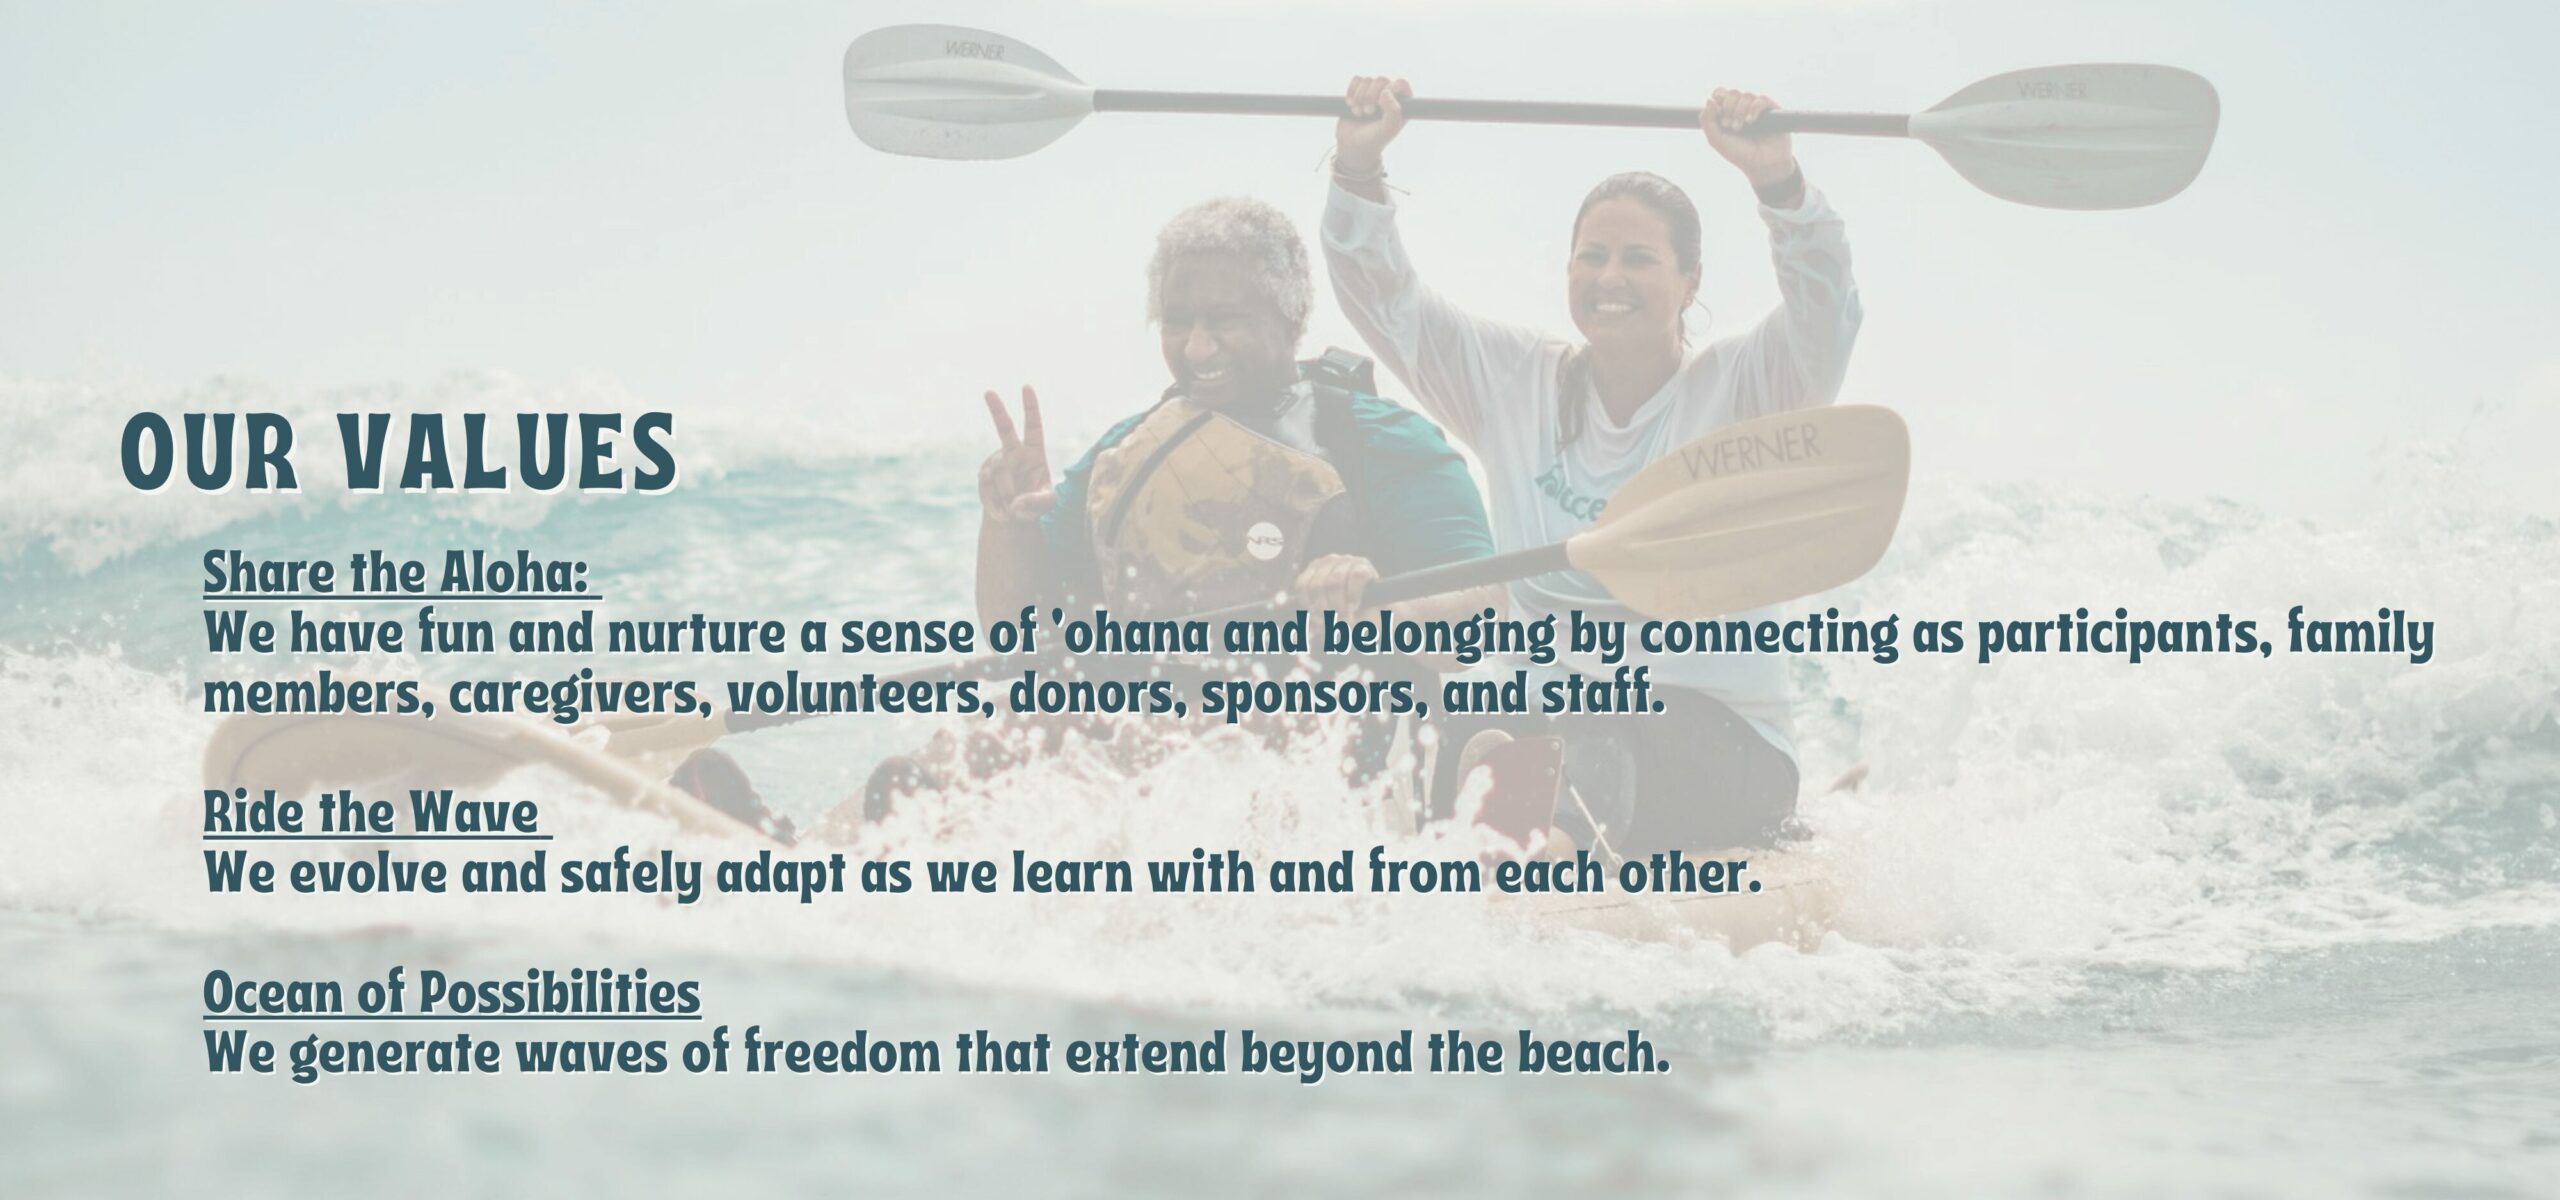 Our Values: Share the Aloha: We have fun and nurturea sense of 'Ohana and belonging by connecting as participants, family members, caregivers, volunteers, donors, sponsors, and staff. Ride the Wave: We evolve and safely adapt as we learn with and from each other. Ocean of Possibilities: We generate waves of freedom that extend beyond the beach.